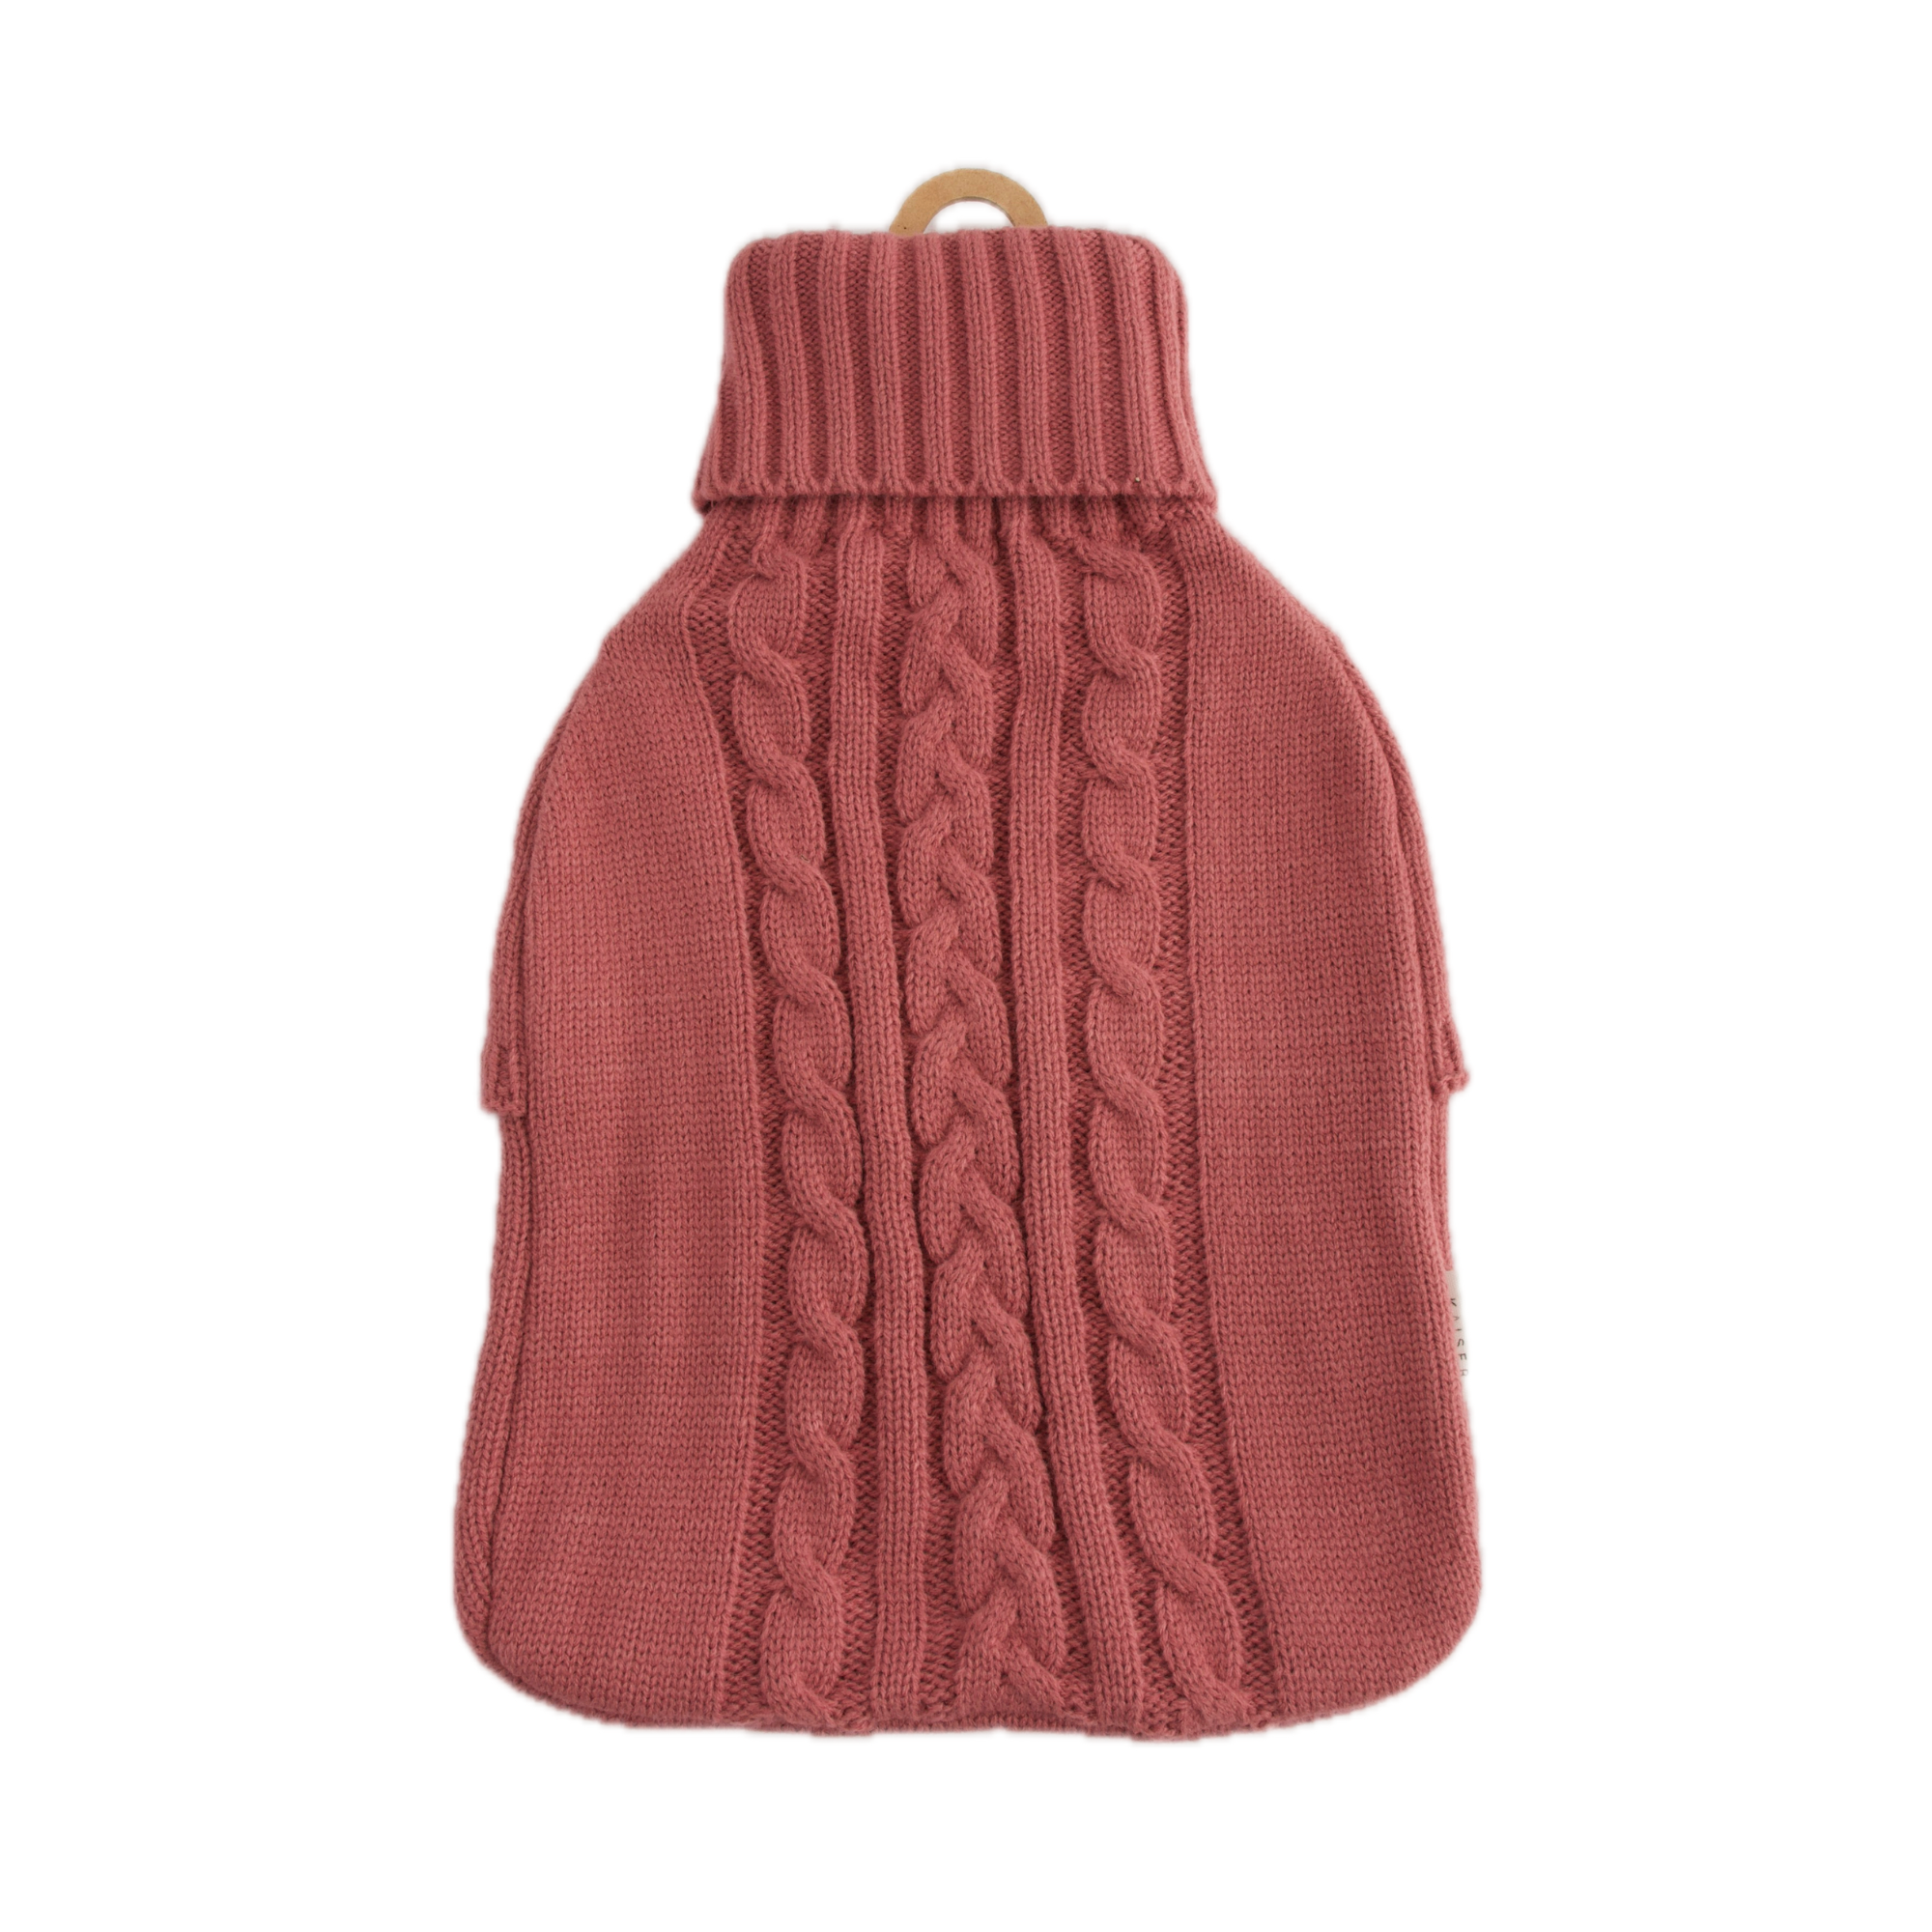 Knitted Hot Water Bottle Cover - Dusty